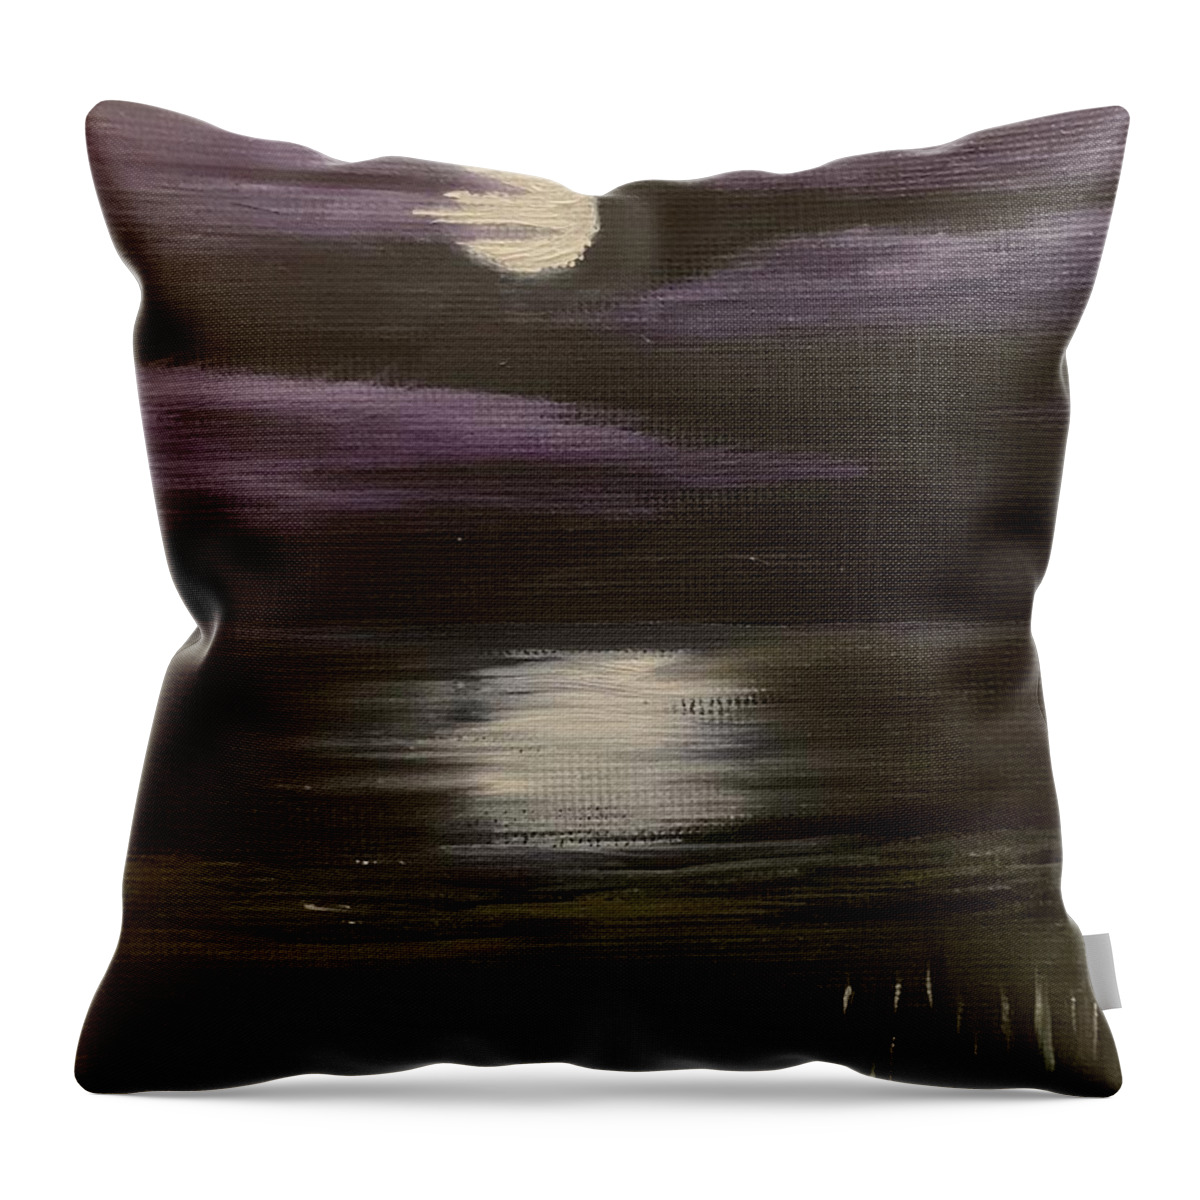 Oil Painting Throw Pillow featuring the painting Moonlight Over Ludington by Lisa White